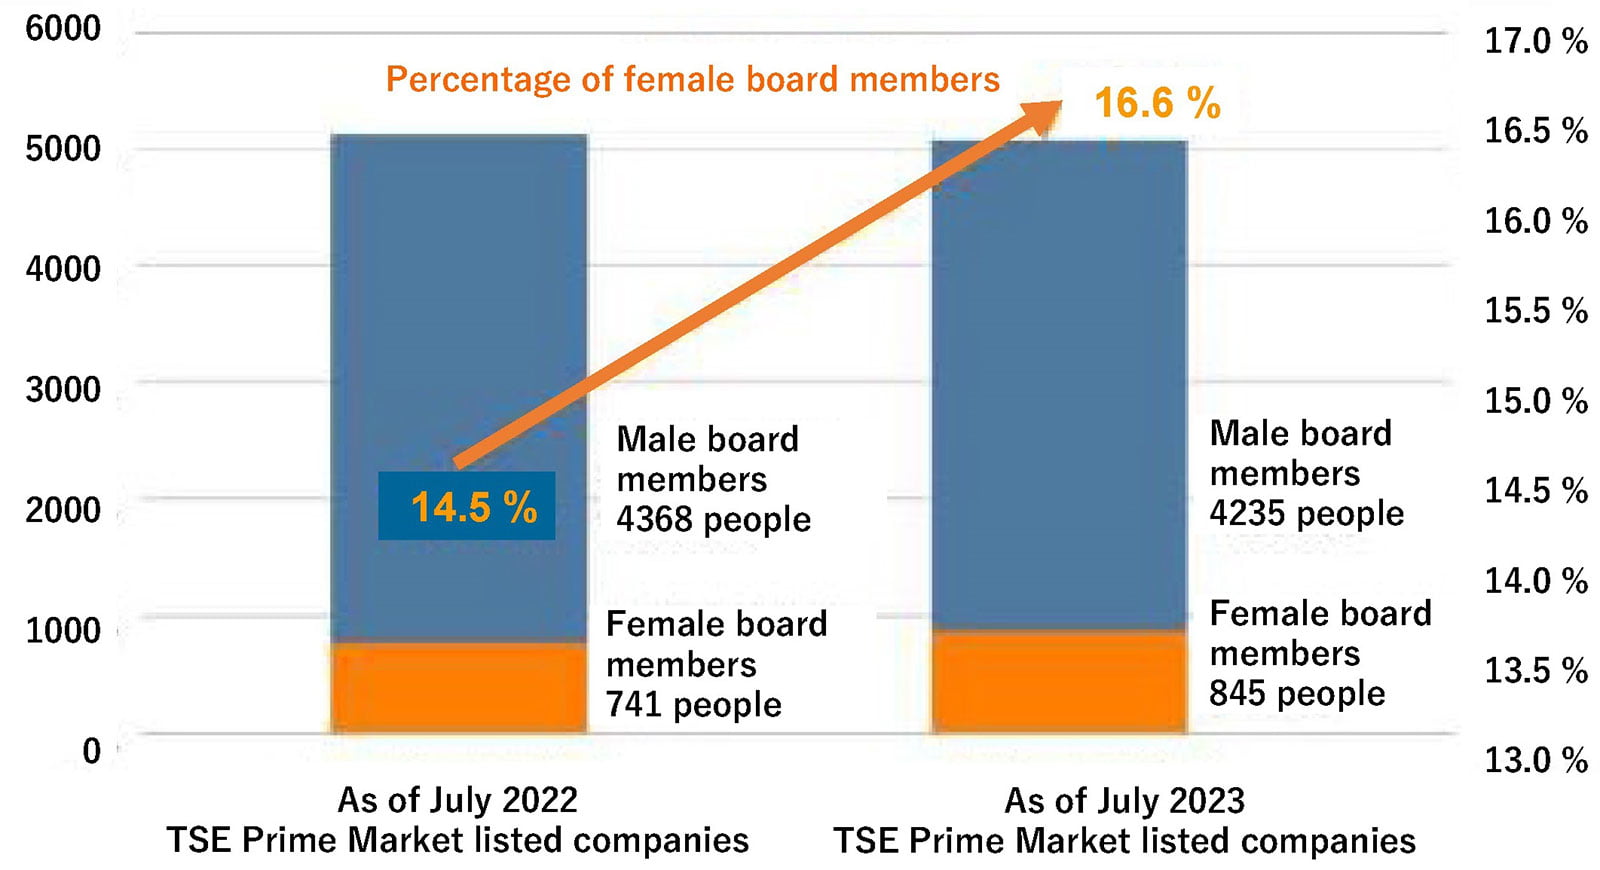 Although the ratio of women to men on the boards of the top 500 companies has increased by 2.1 percentage points compared to a year ago, it remains difficult to increase the number of women in management positions.